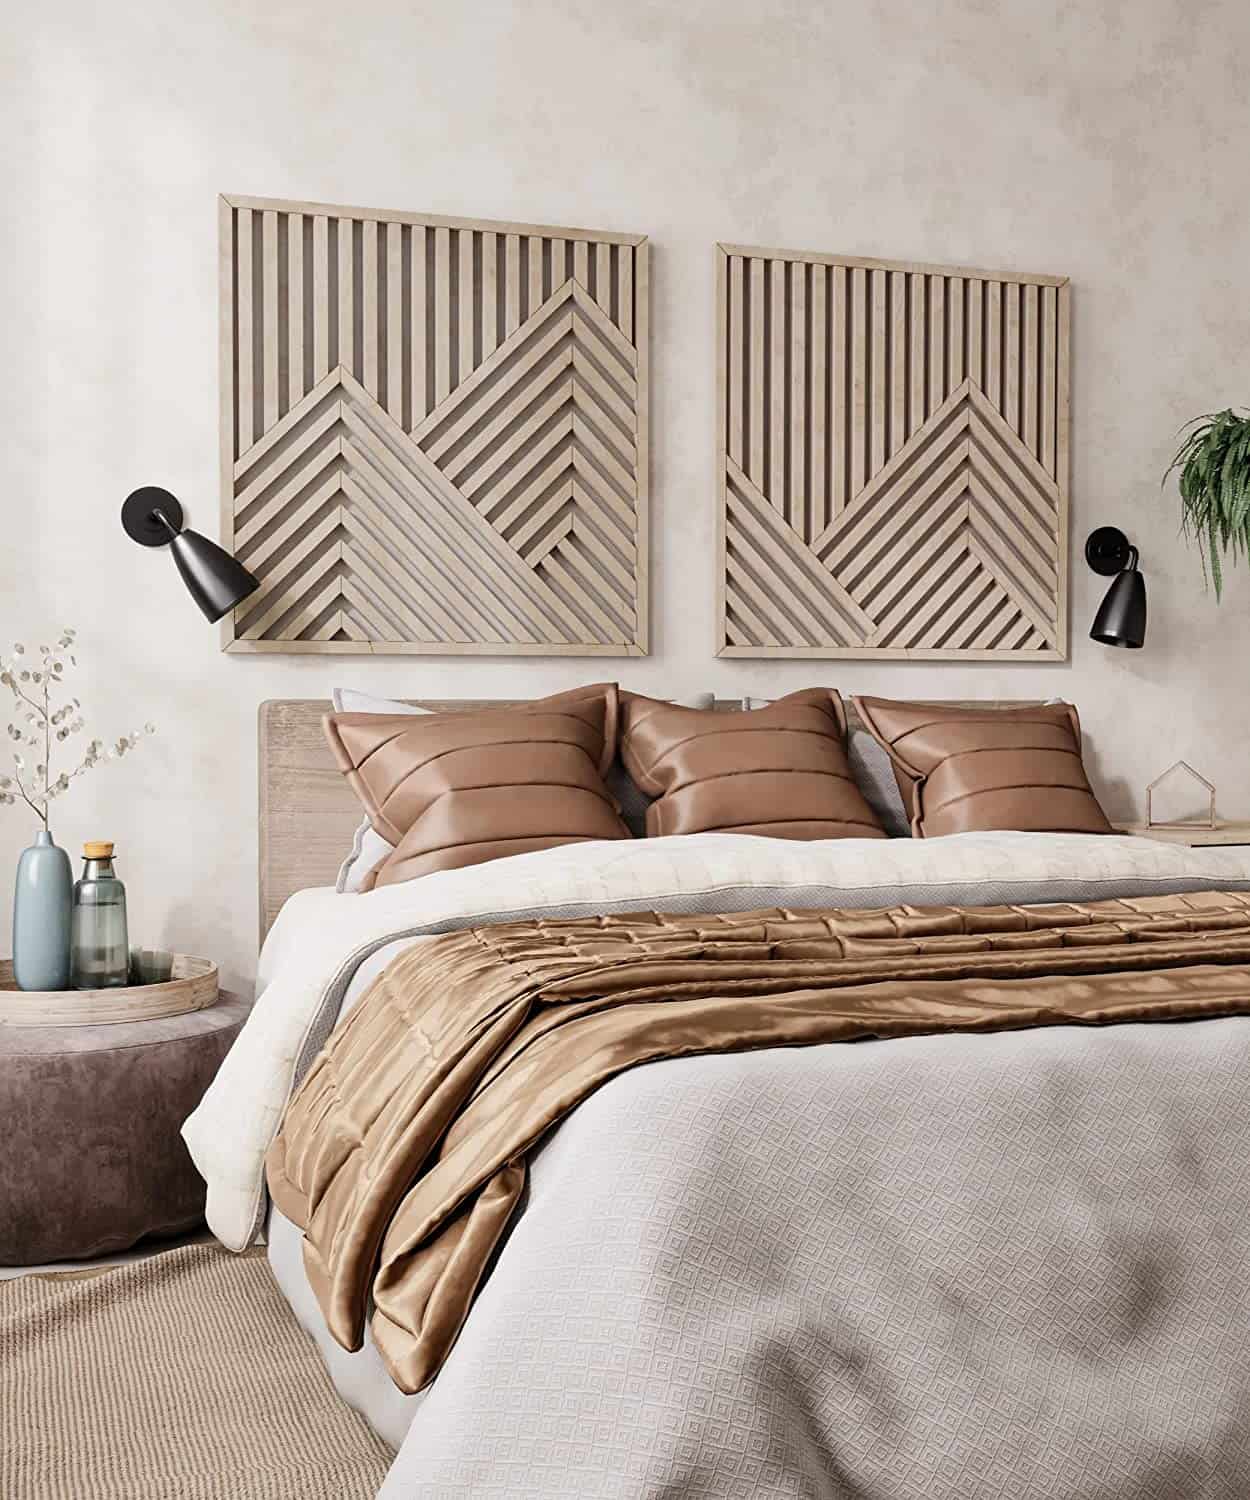 Two large wooden mountain style geometric wall panels in a natural finish centered on a neutral bedroom wall.